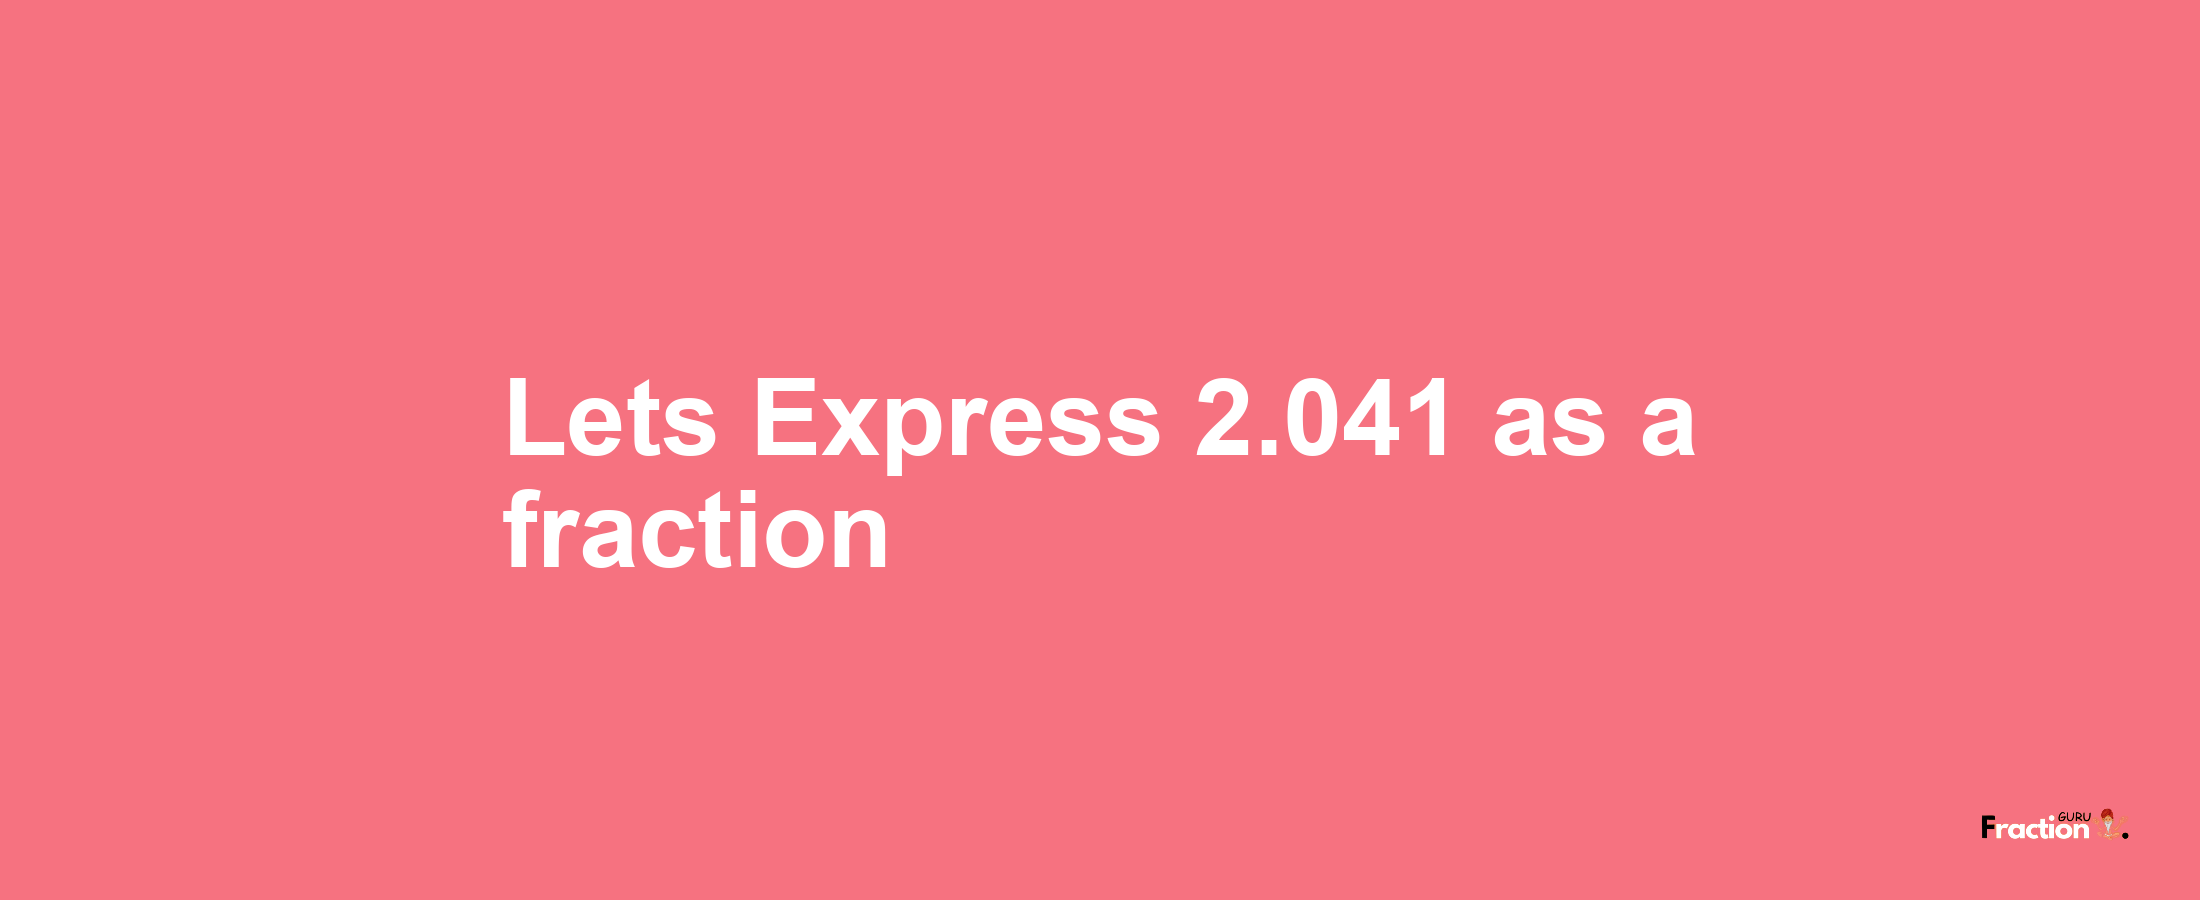 Lets Express 2.041 as afraction